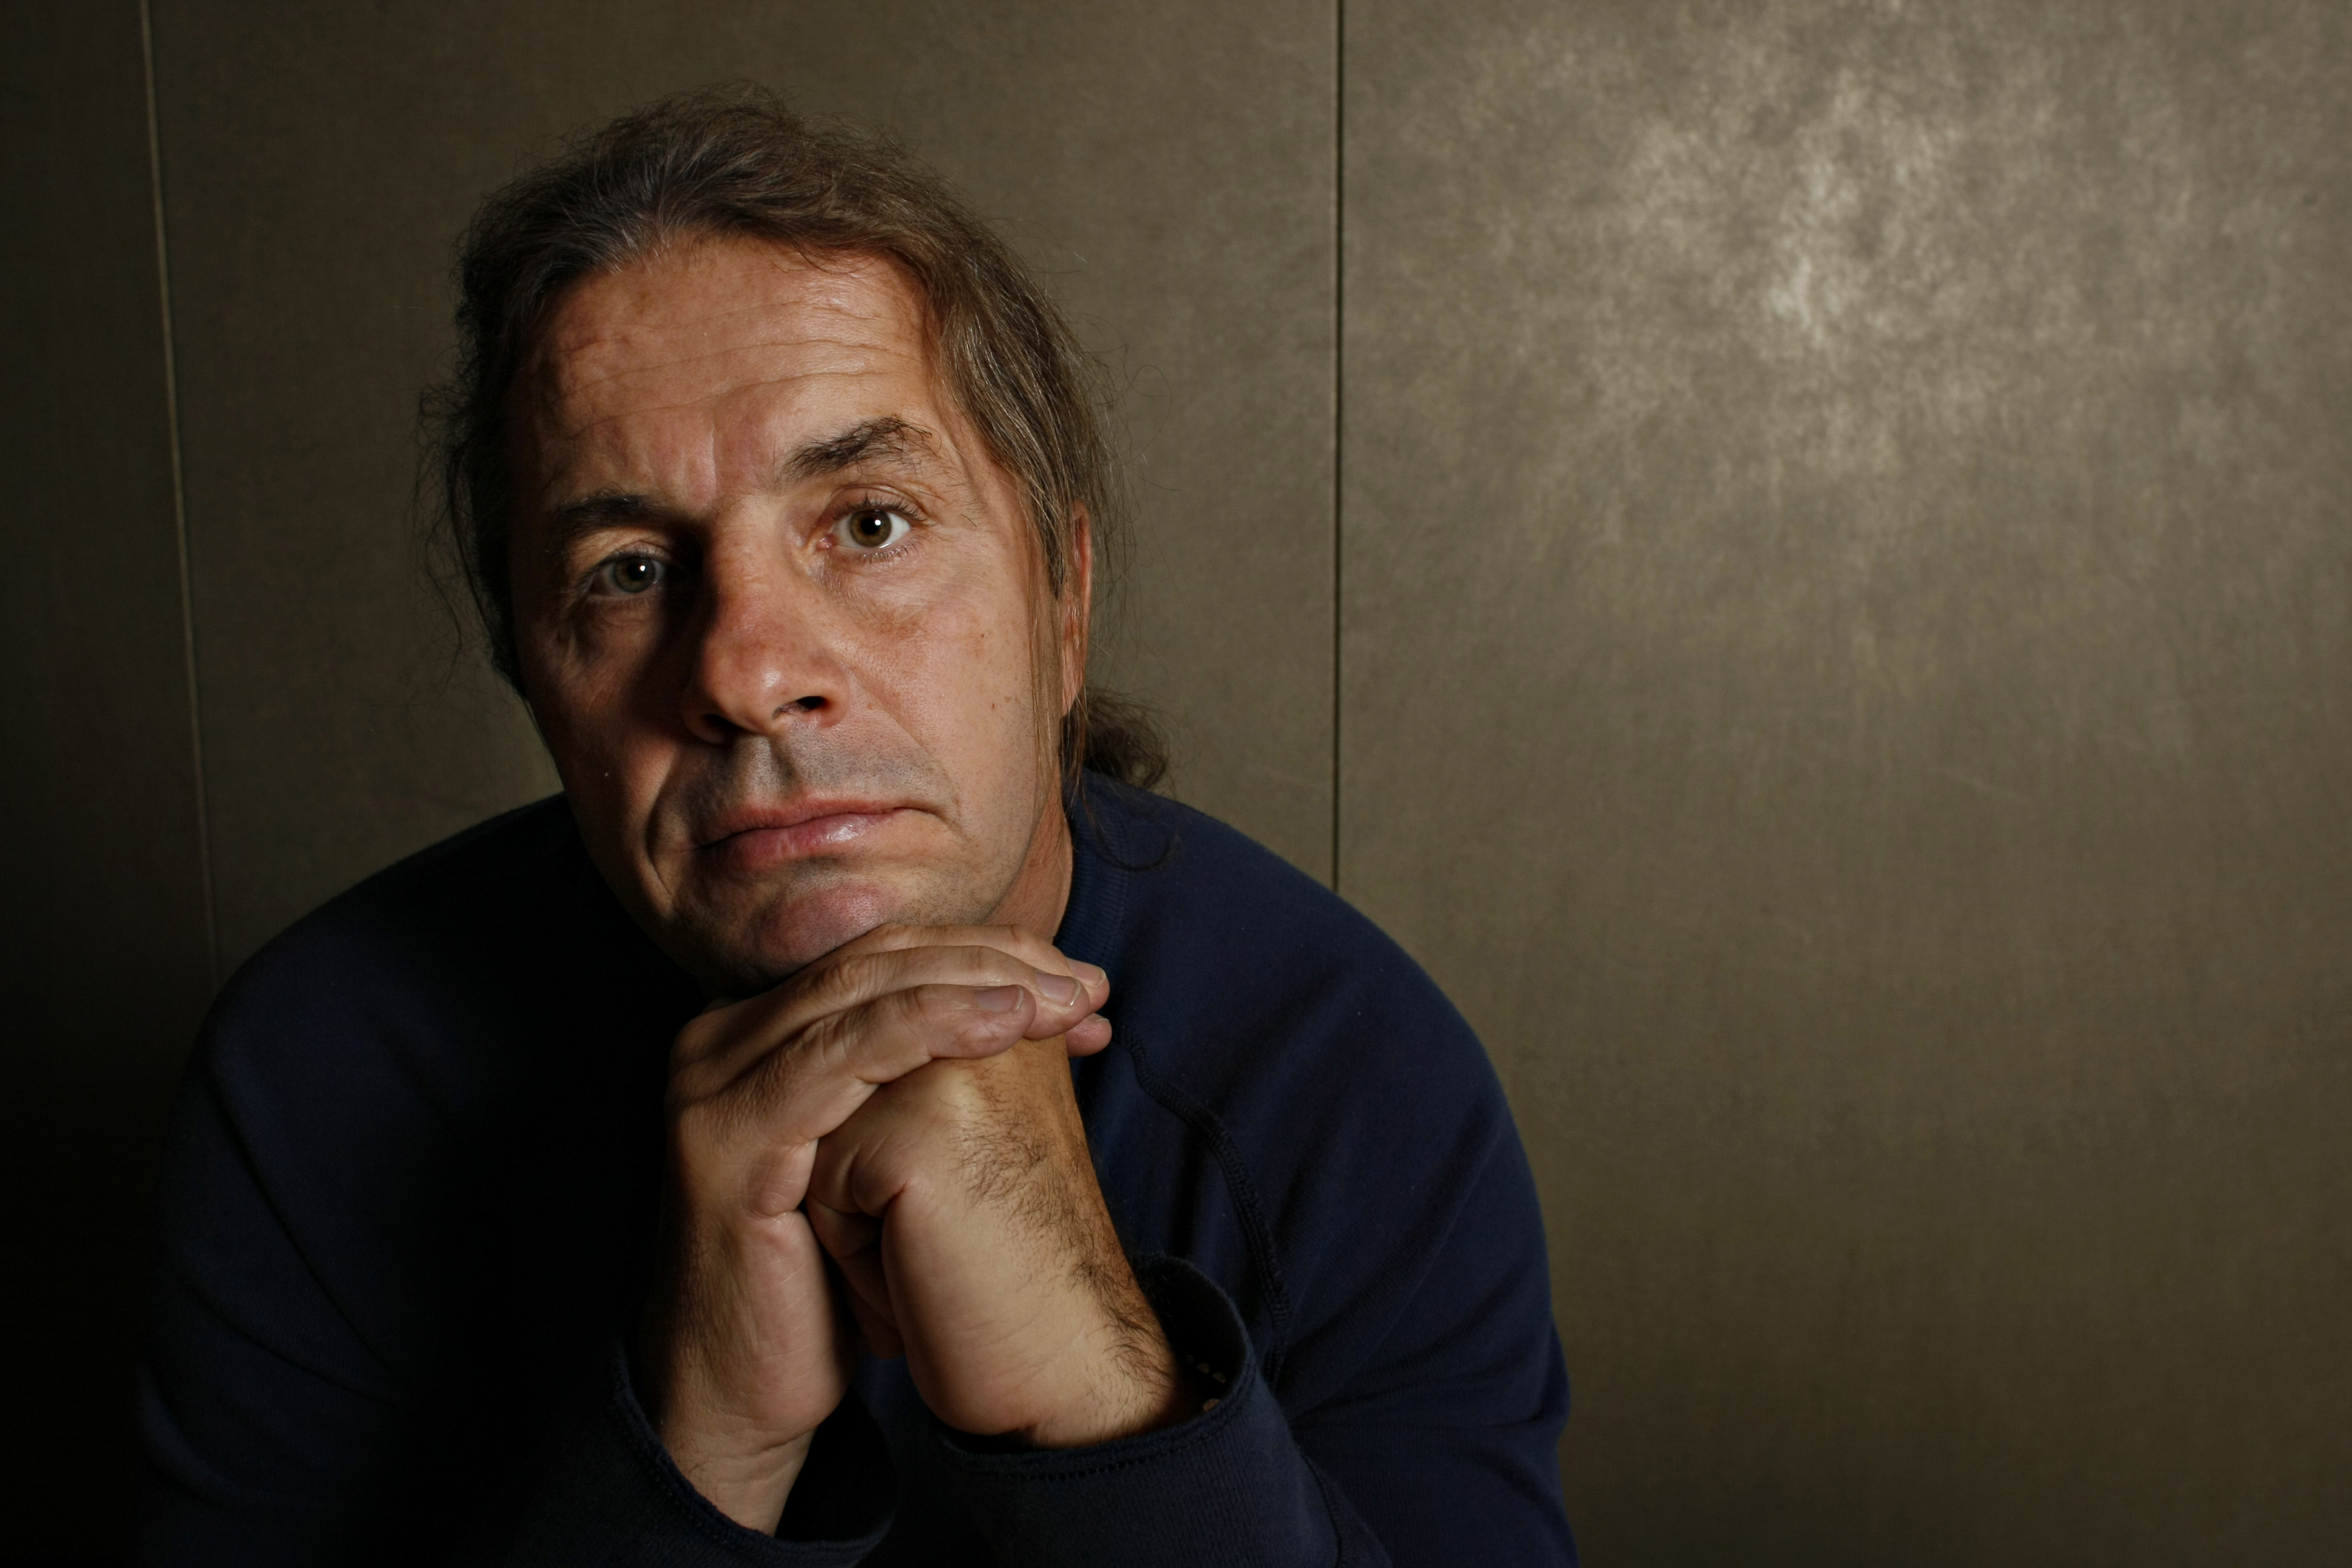 Bret Hart photographed at Random House Publishing, October 23, 2007. (Andrew Francis Wallace—Toronto Star/Getty Images)